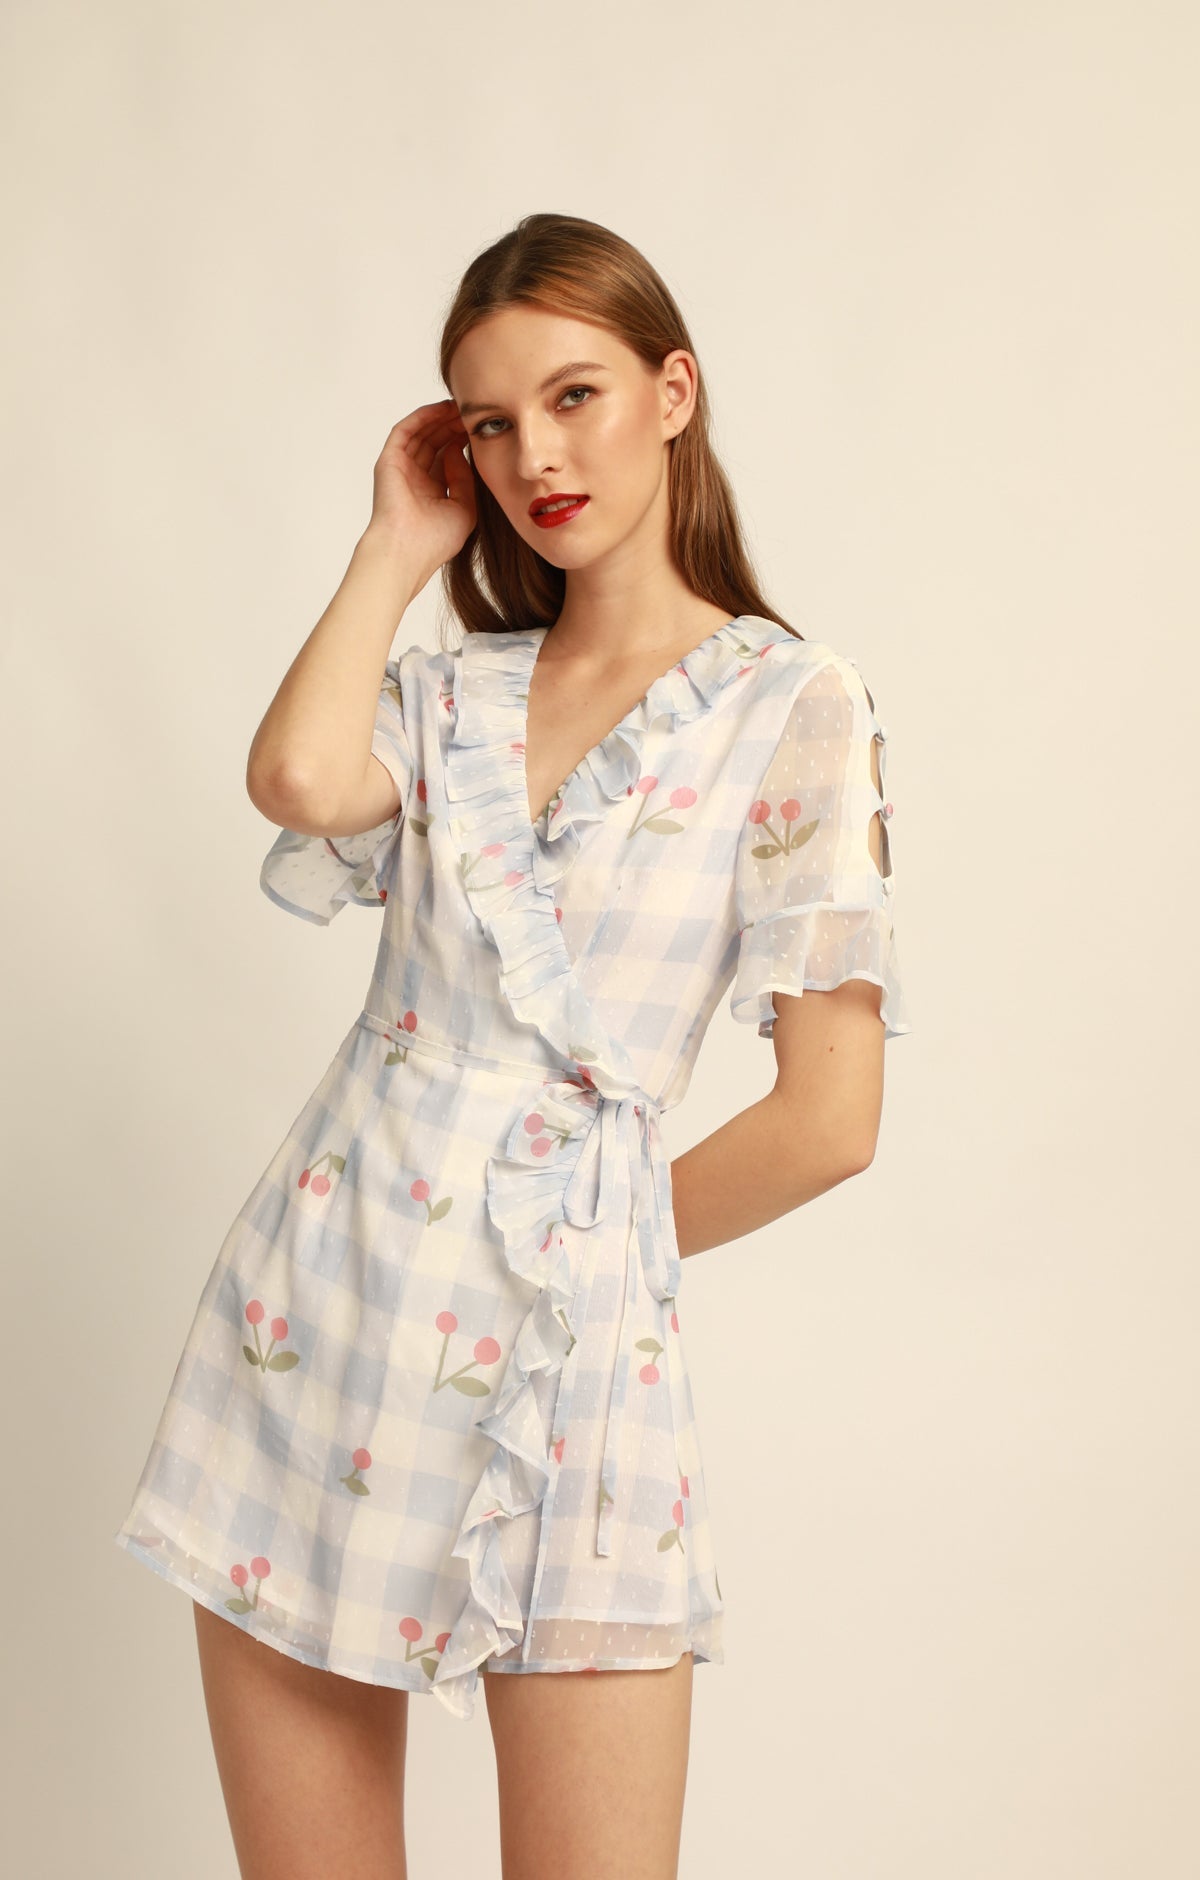 Blue and White Checked Cherry Pattern Sleeve Hollow Out Dress - ByQuaint